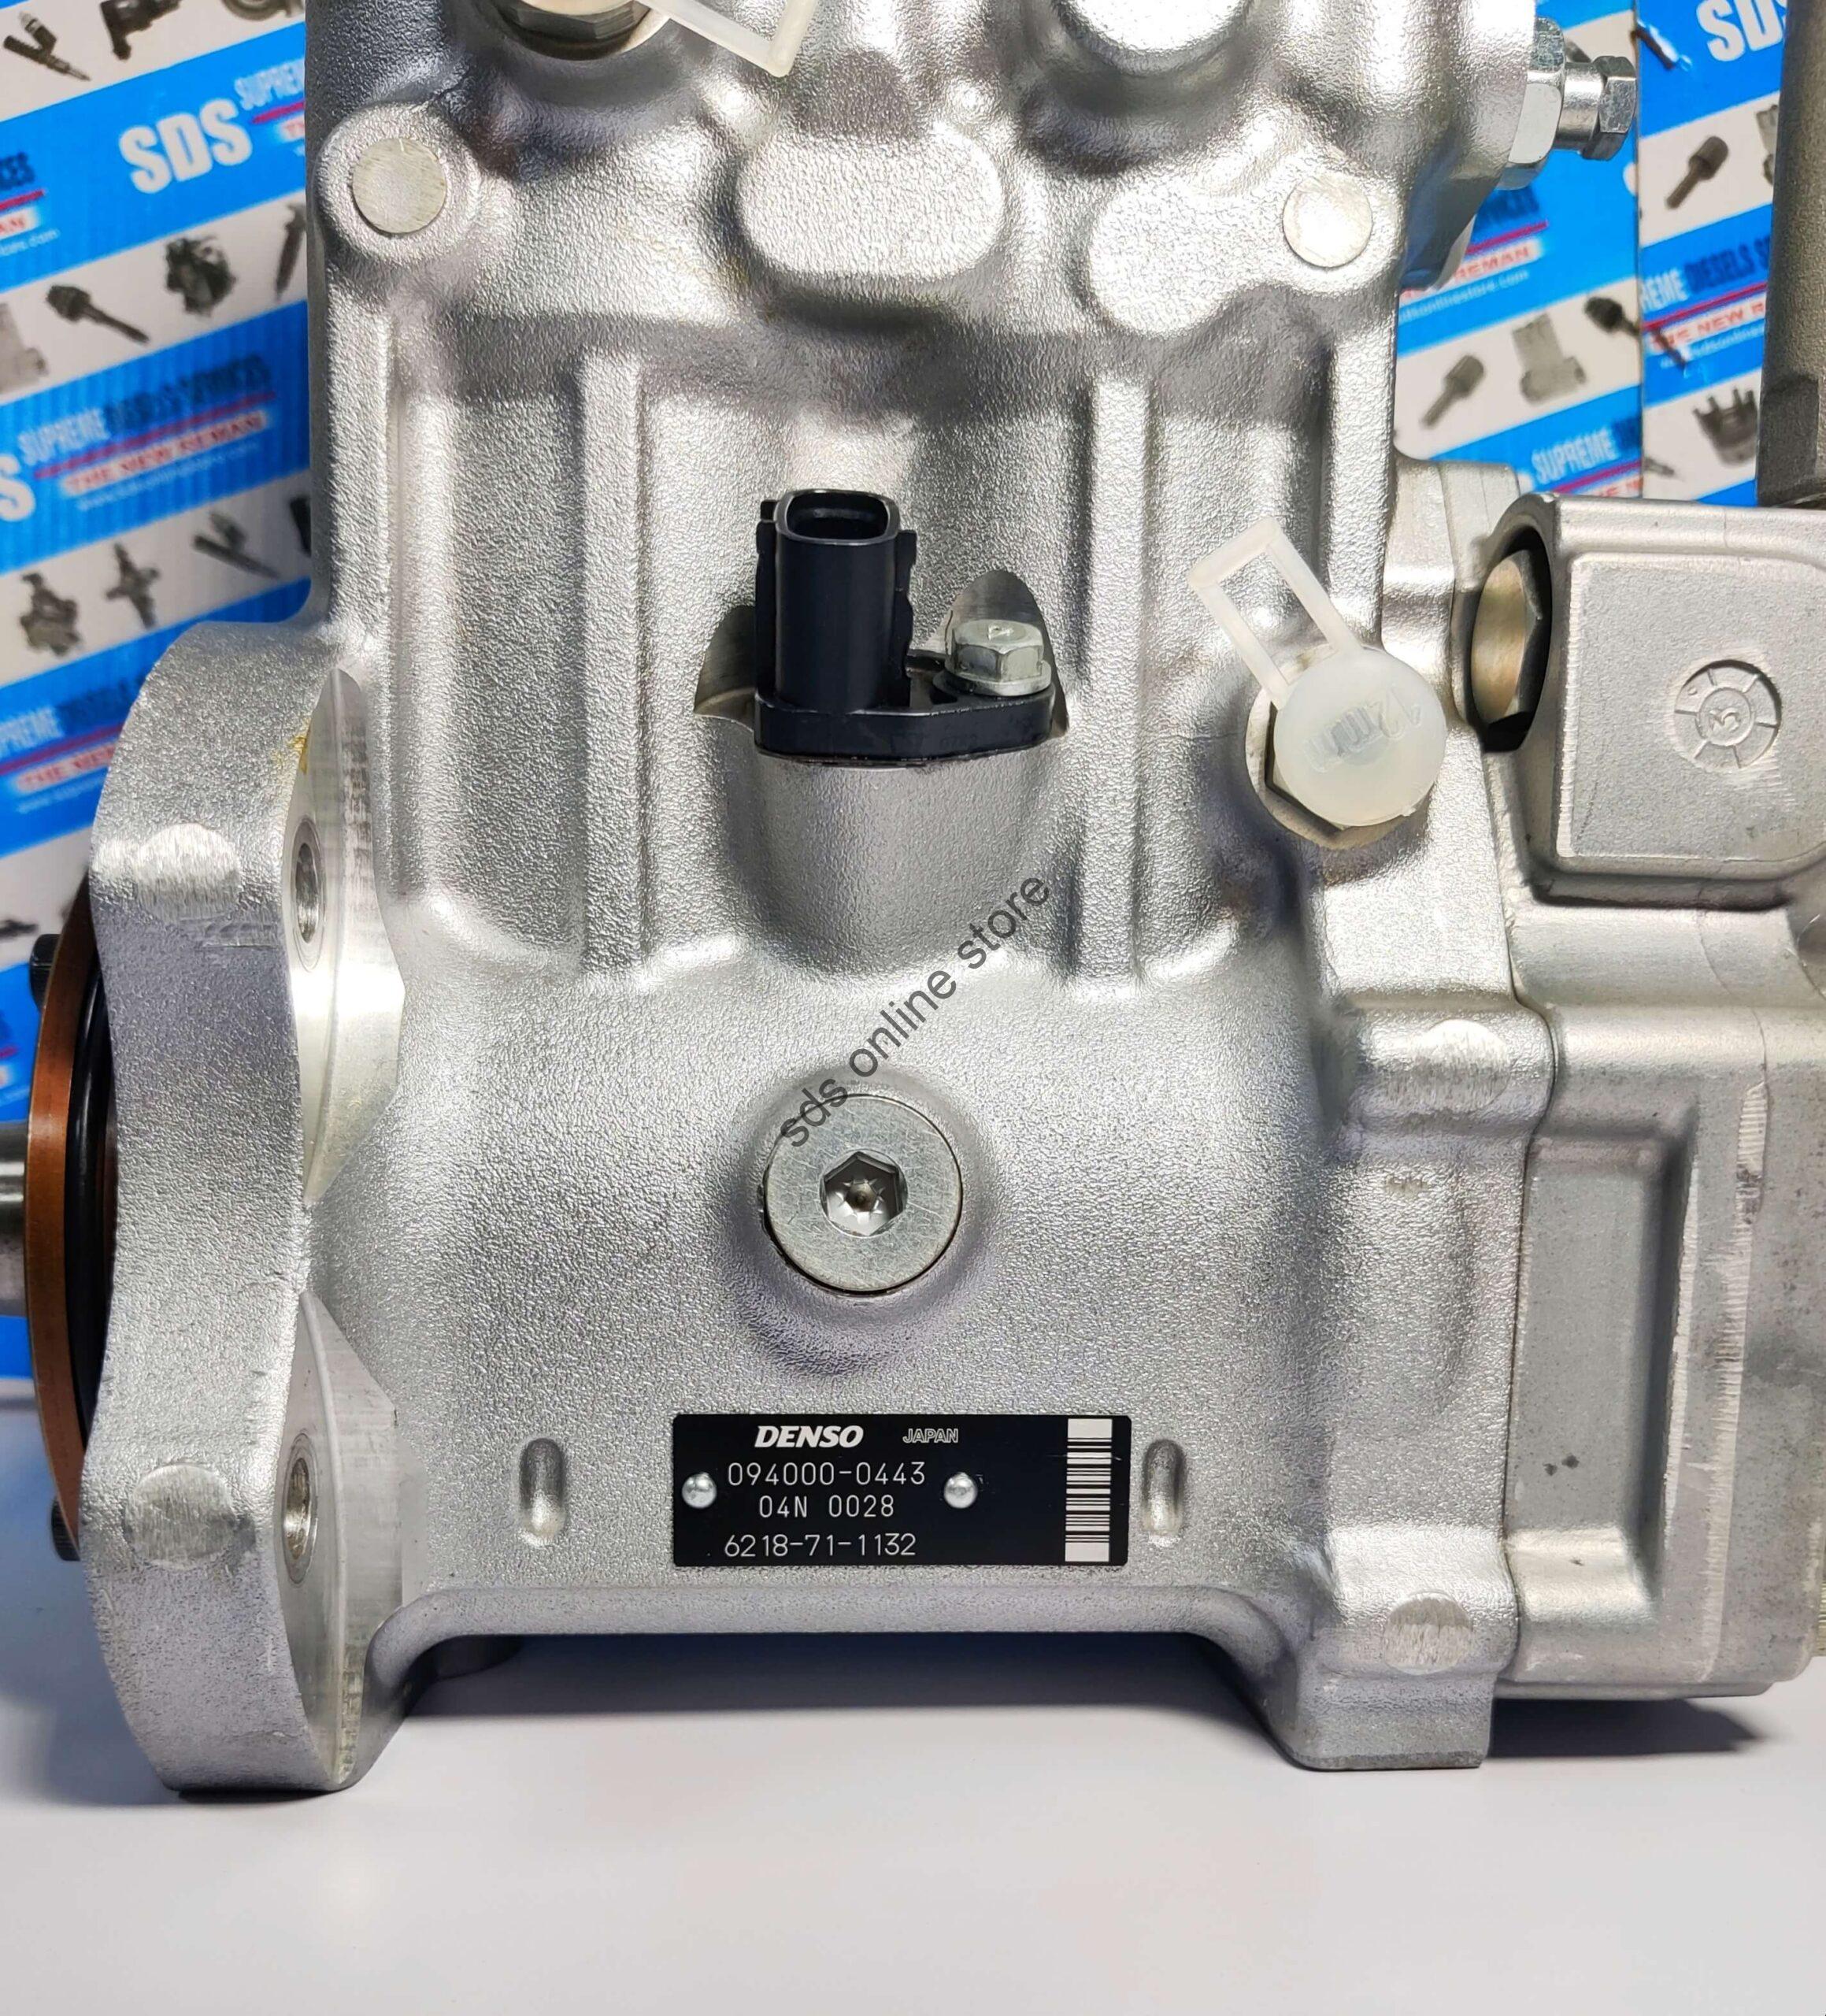 DENSO HP0 FUEL INJECTION PUMP ASSEMBLY 094000-0443